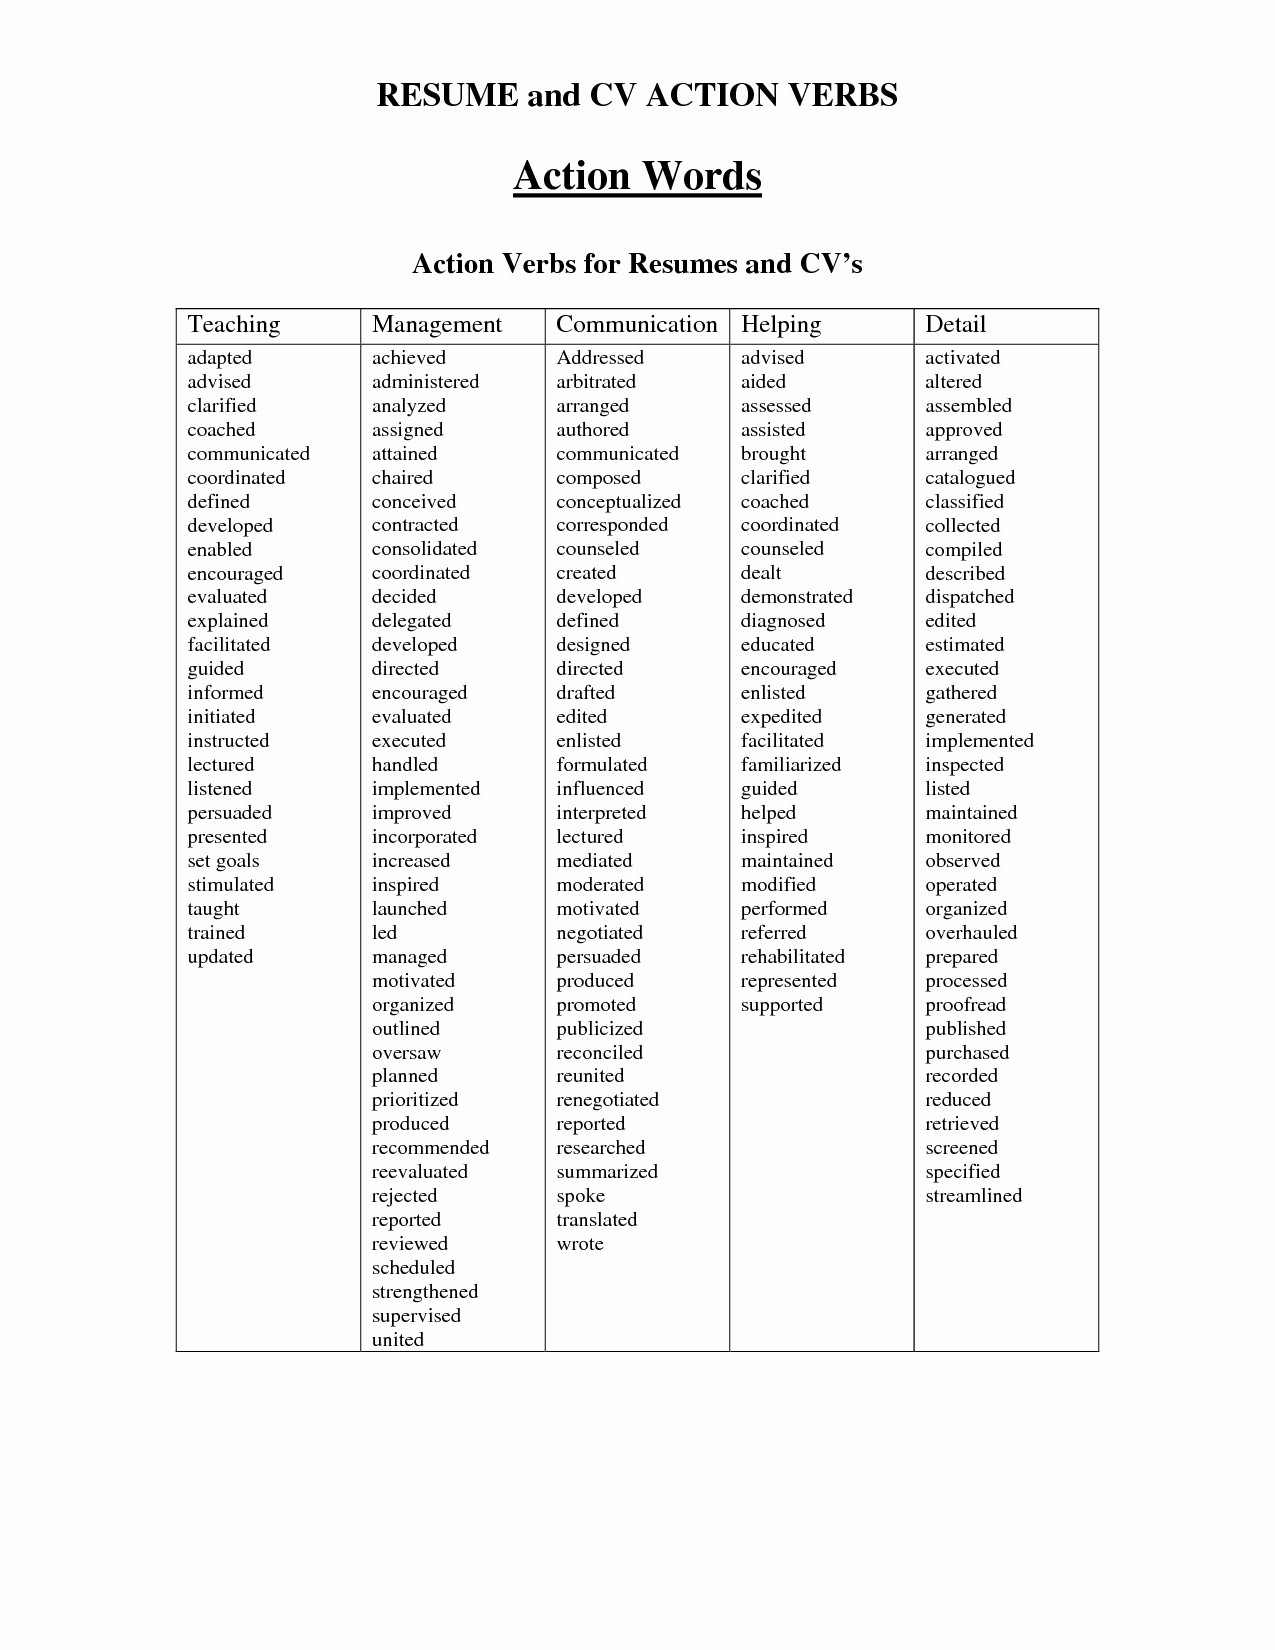 Resume Action Words Sales Resume Action Verbs Beautiful Examples For Resumes Of Words 8 resume action words|wikiresume.com